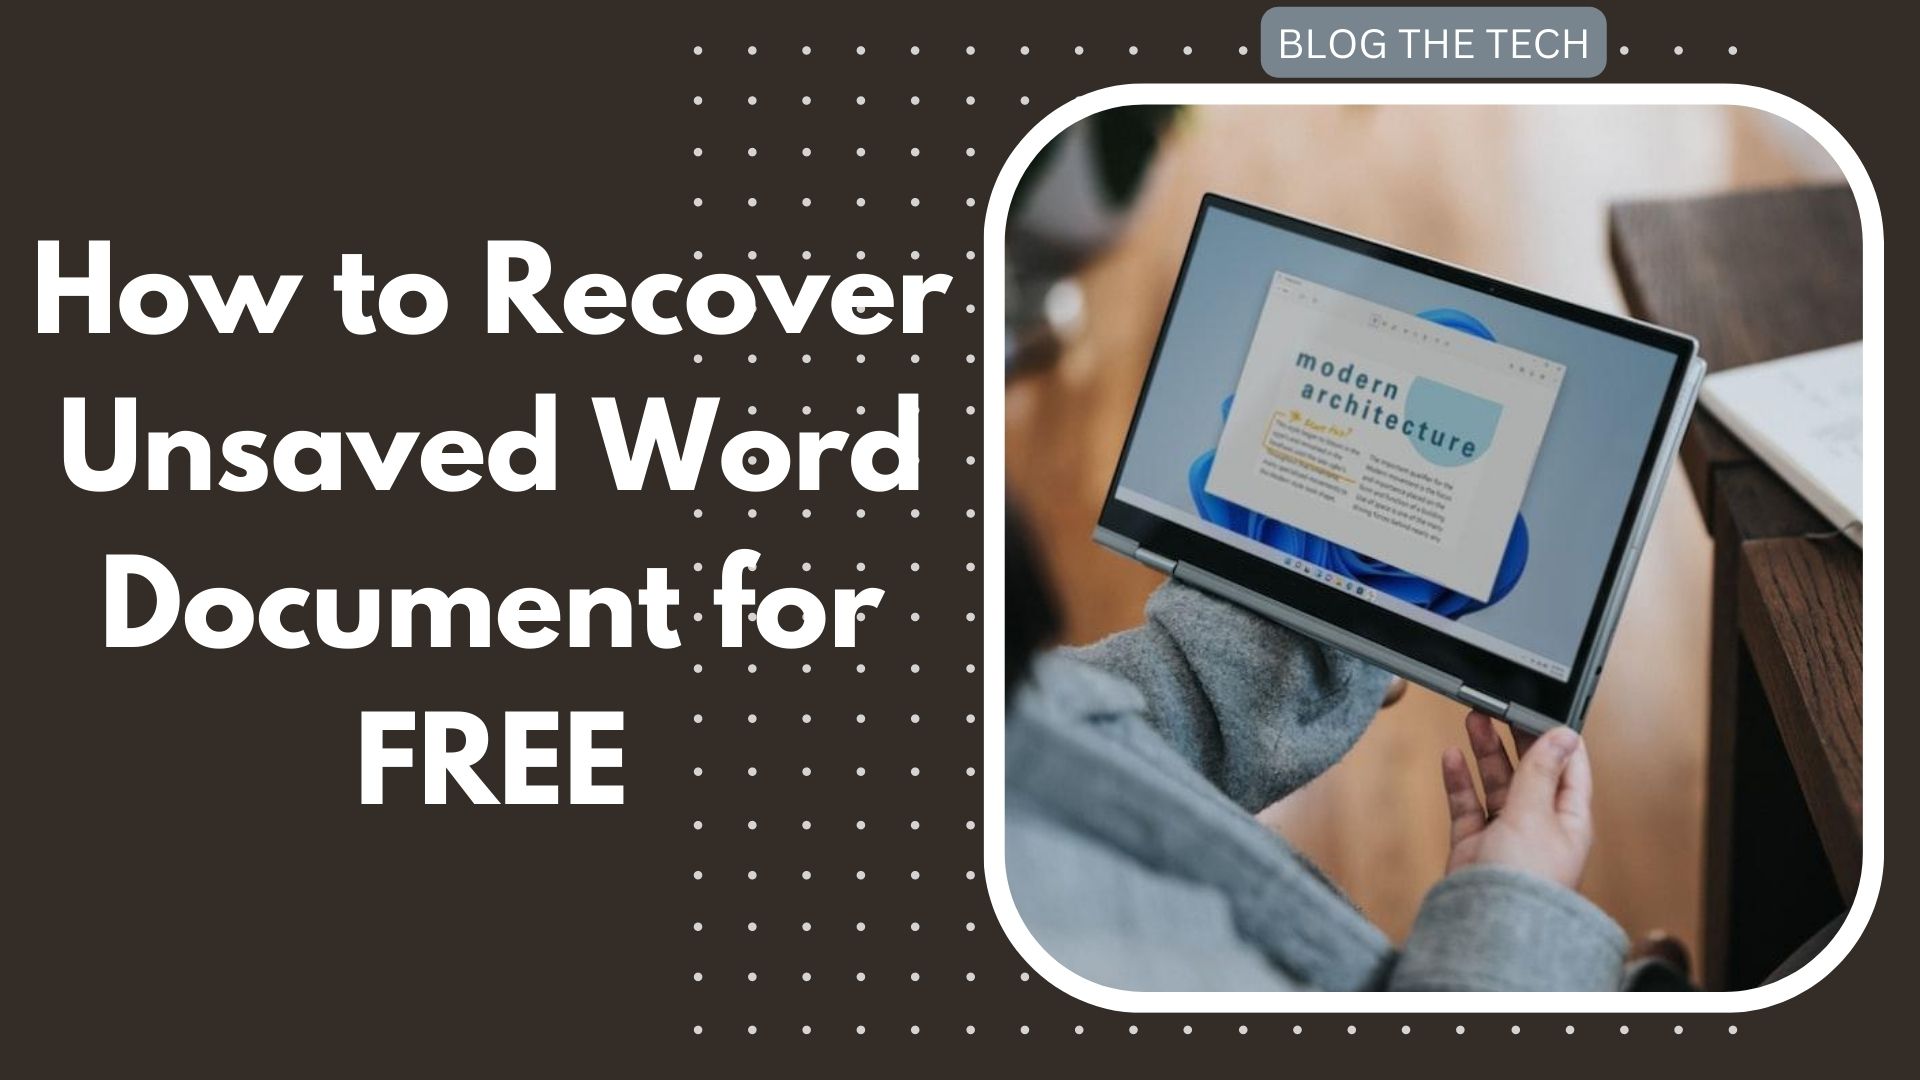 How to Recover Unsaved Word Document for FREE